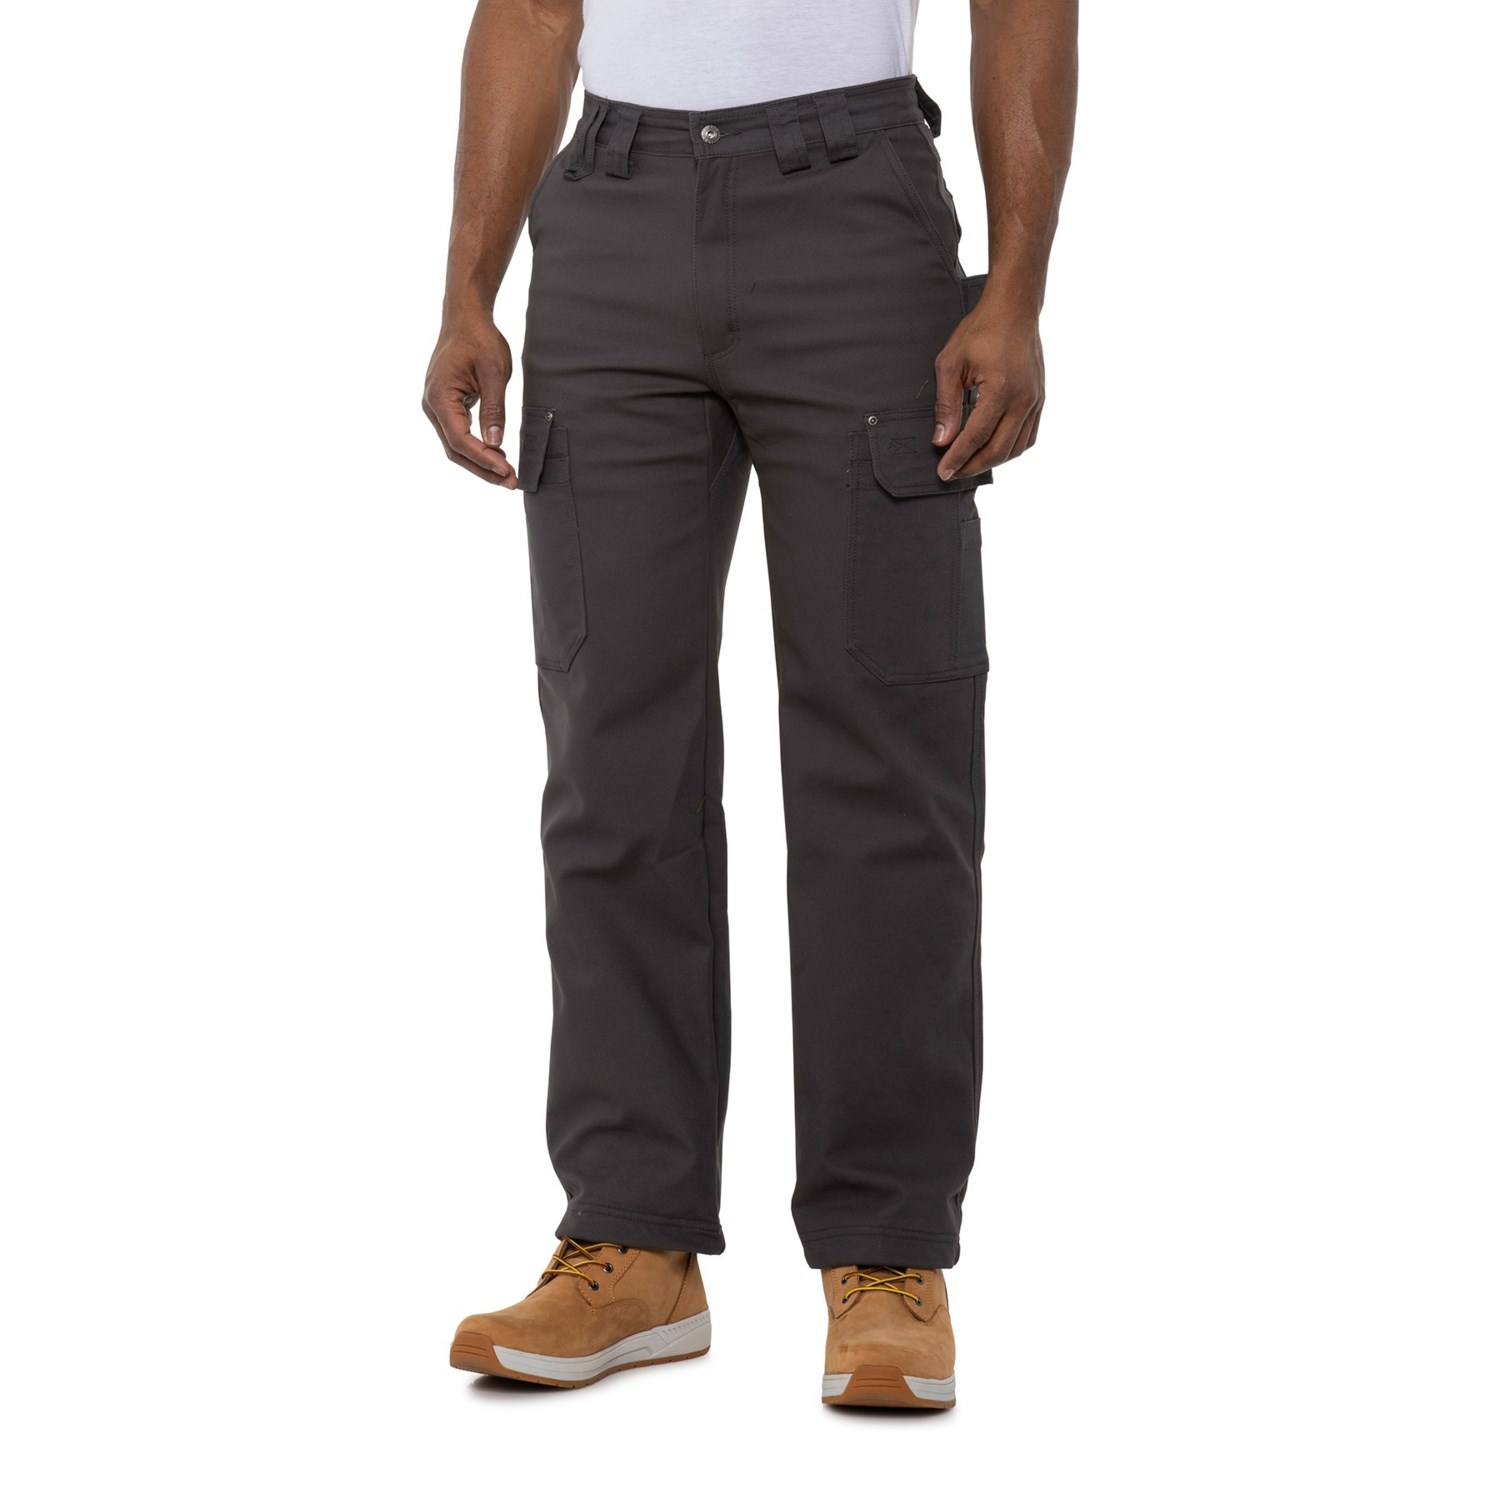 Smith's Workwear Utility Cargo Work Pants (For Men) - Save 40%